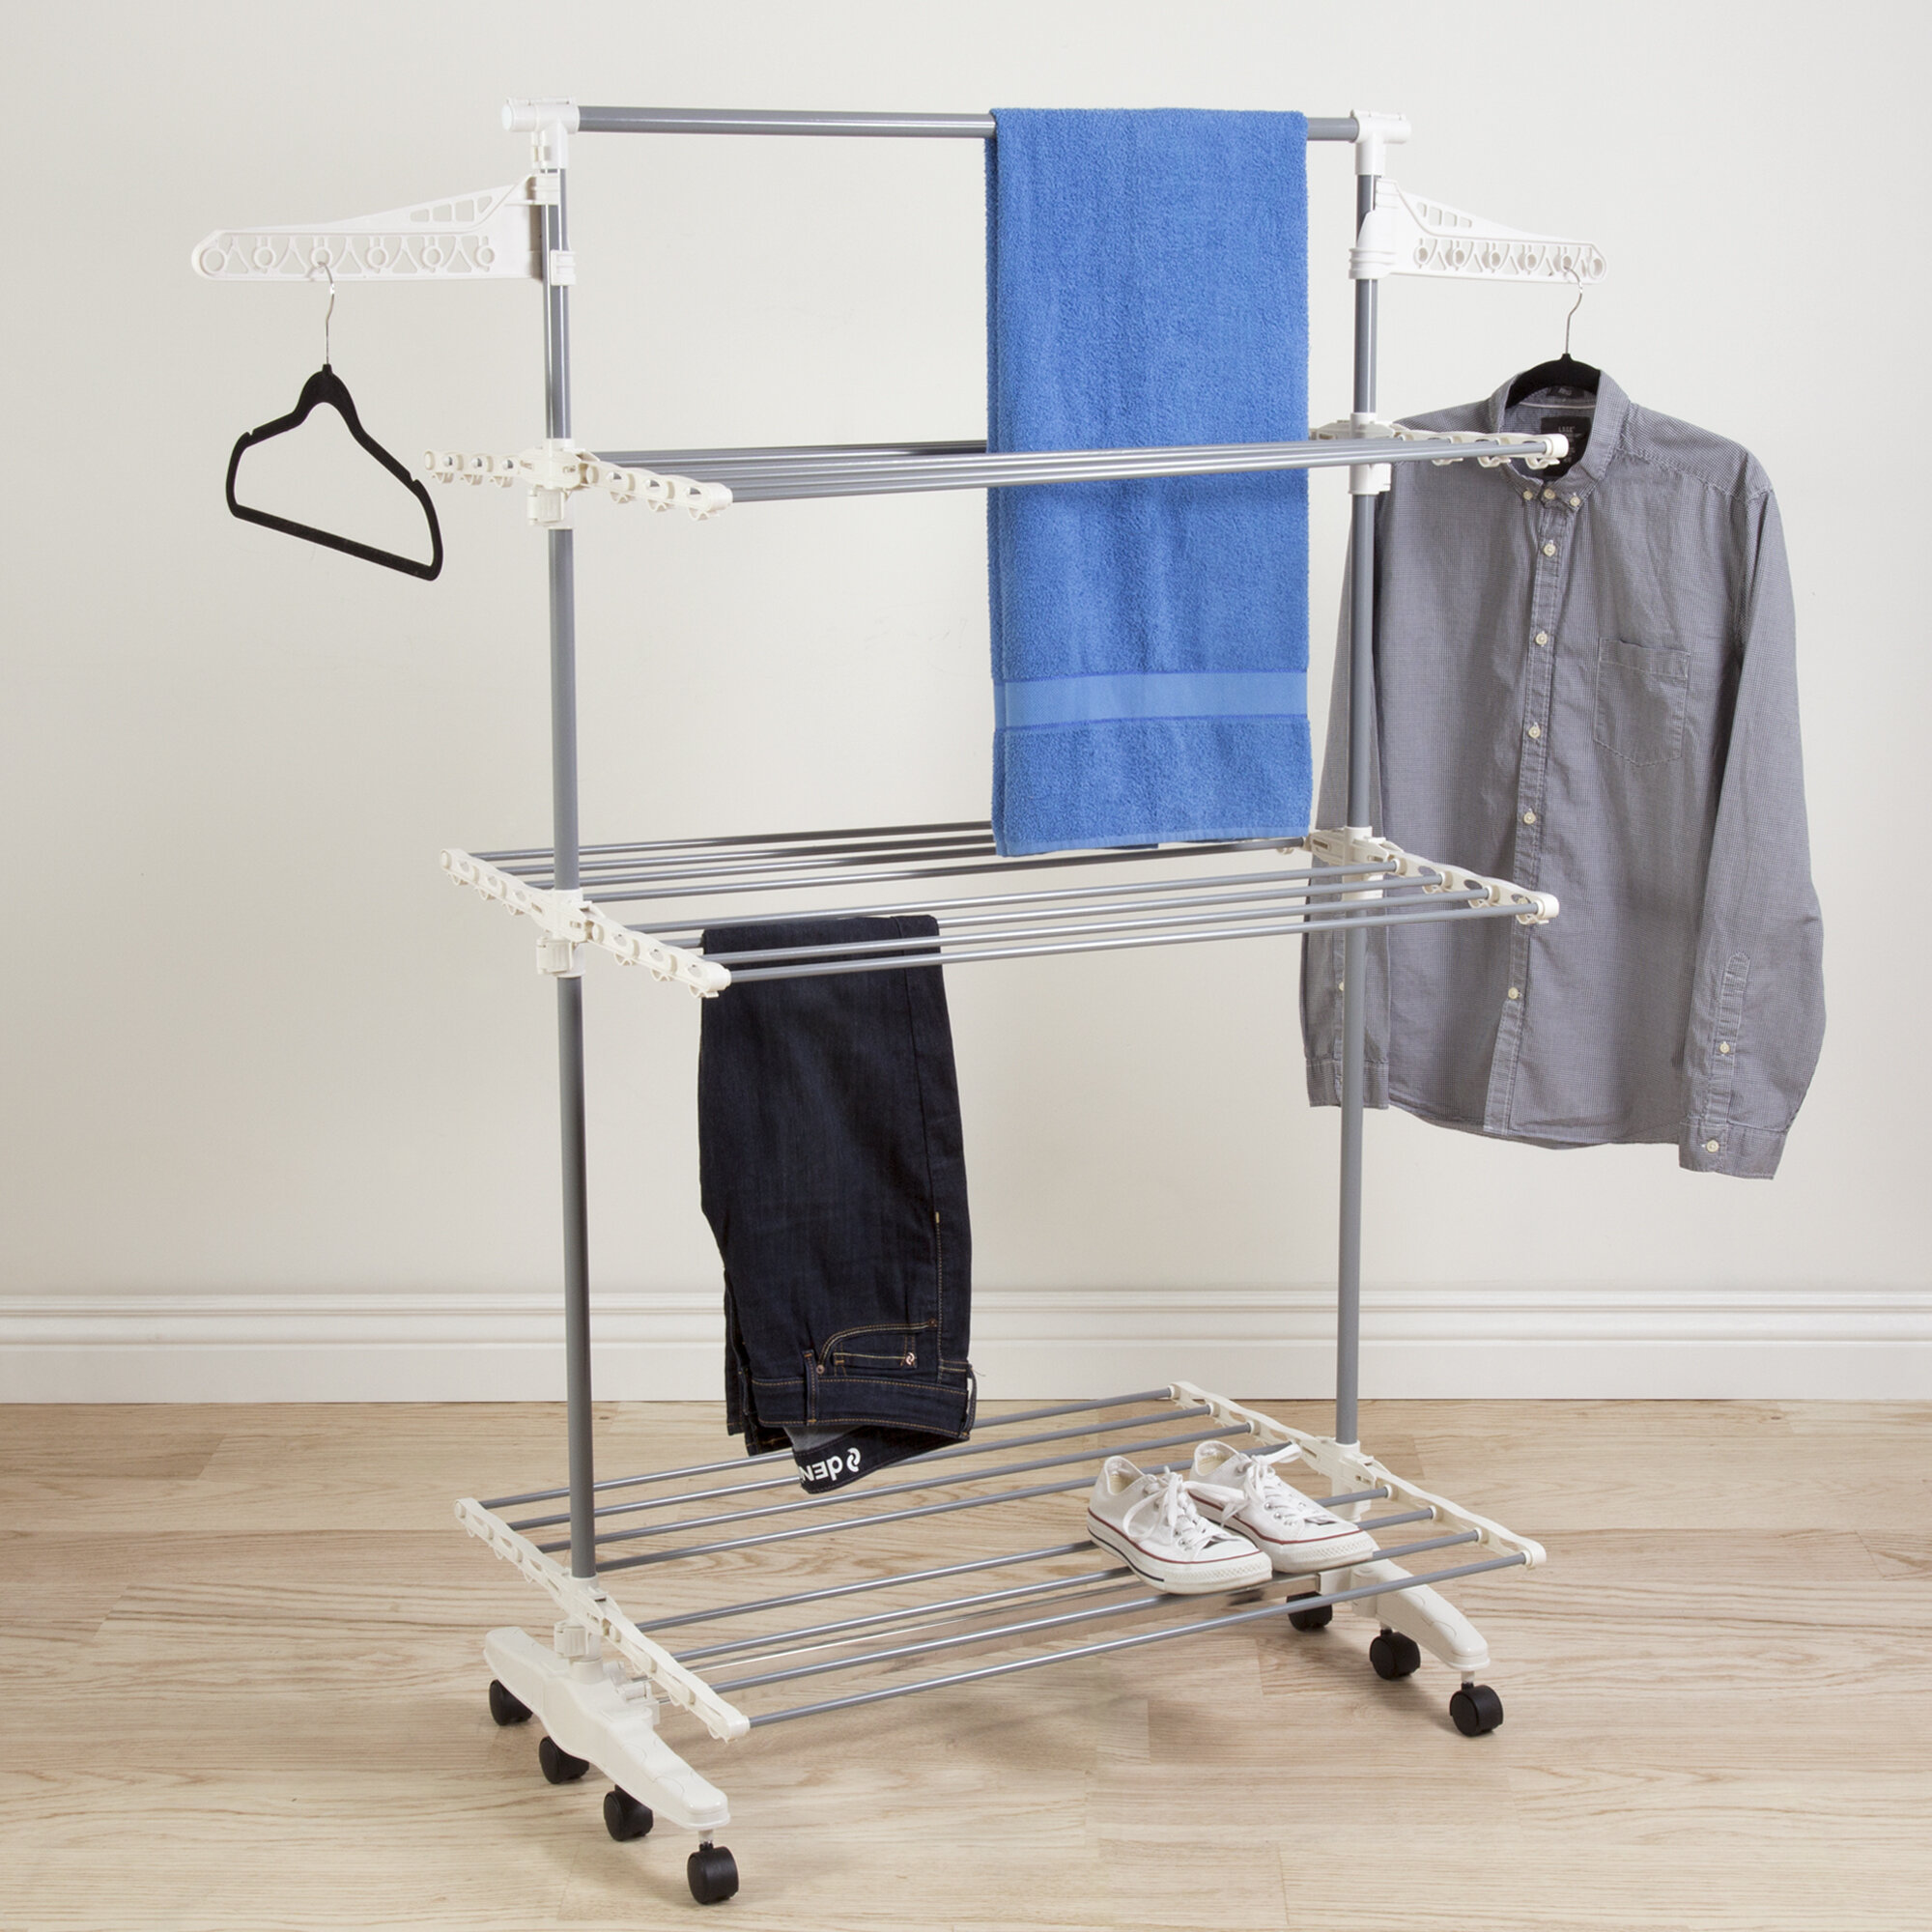 Collapsible for Easy Storage 3 Tier Clothes Drying Rack Indoor or Outdoor Use Great for Apartments and Condos Rolling Laundry Dryer Hanger with Wash Bag